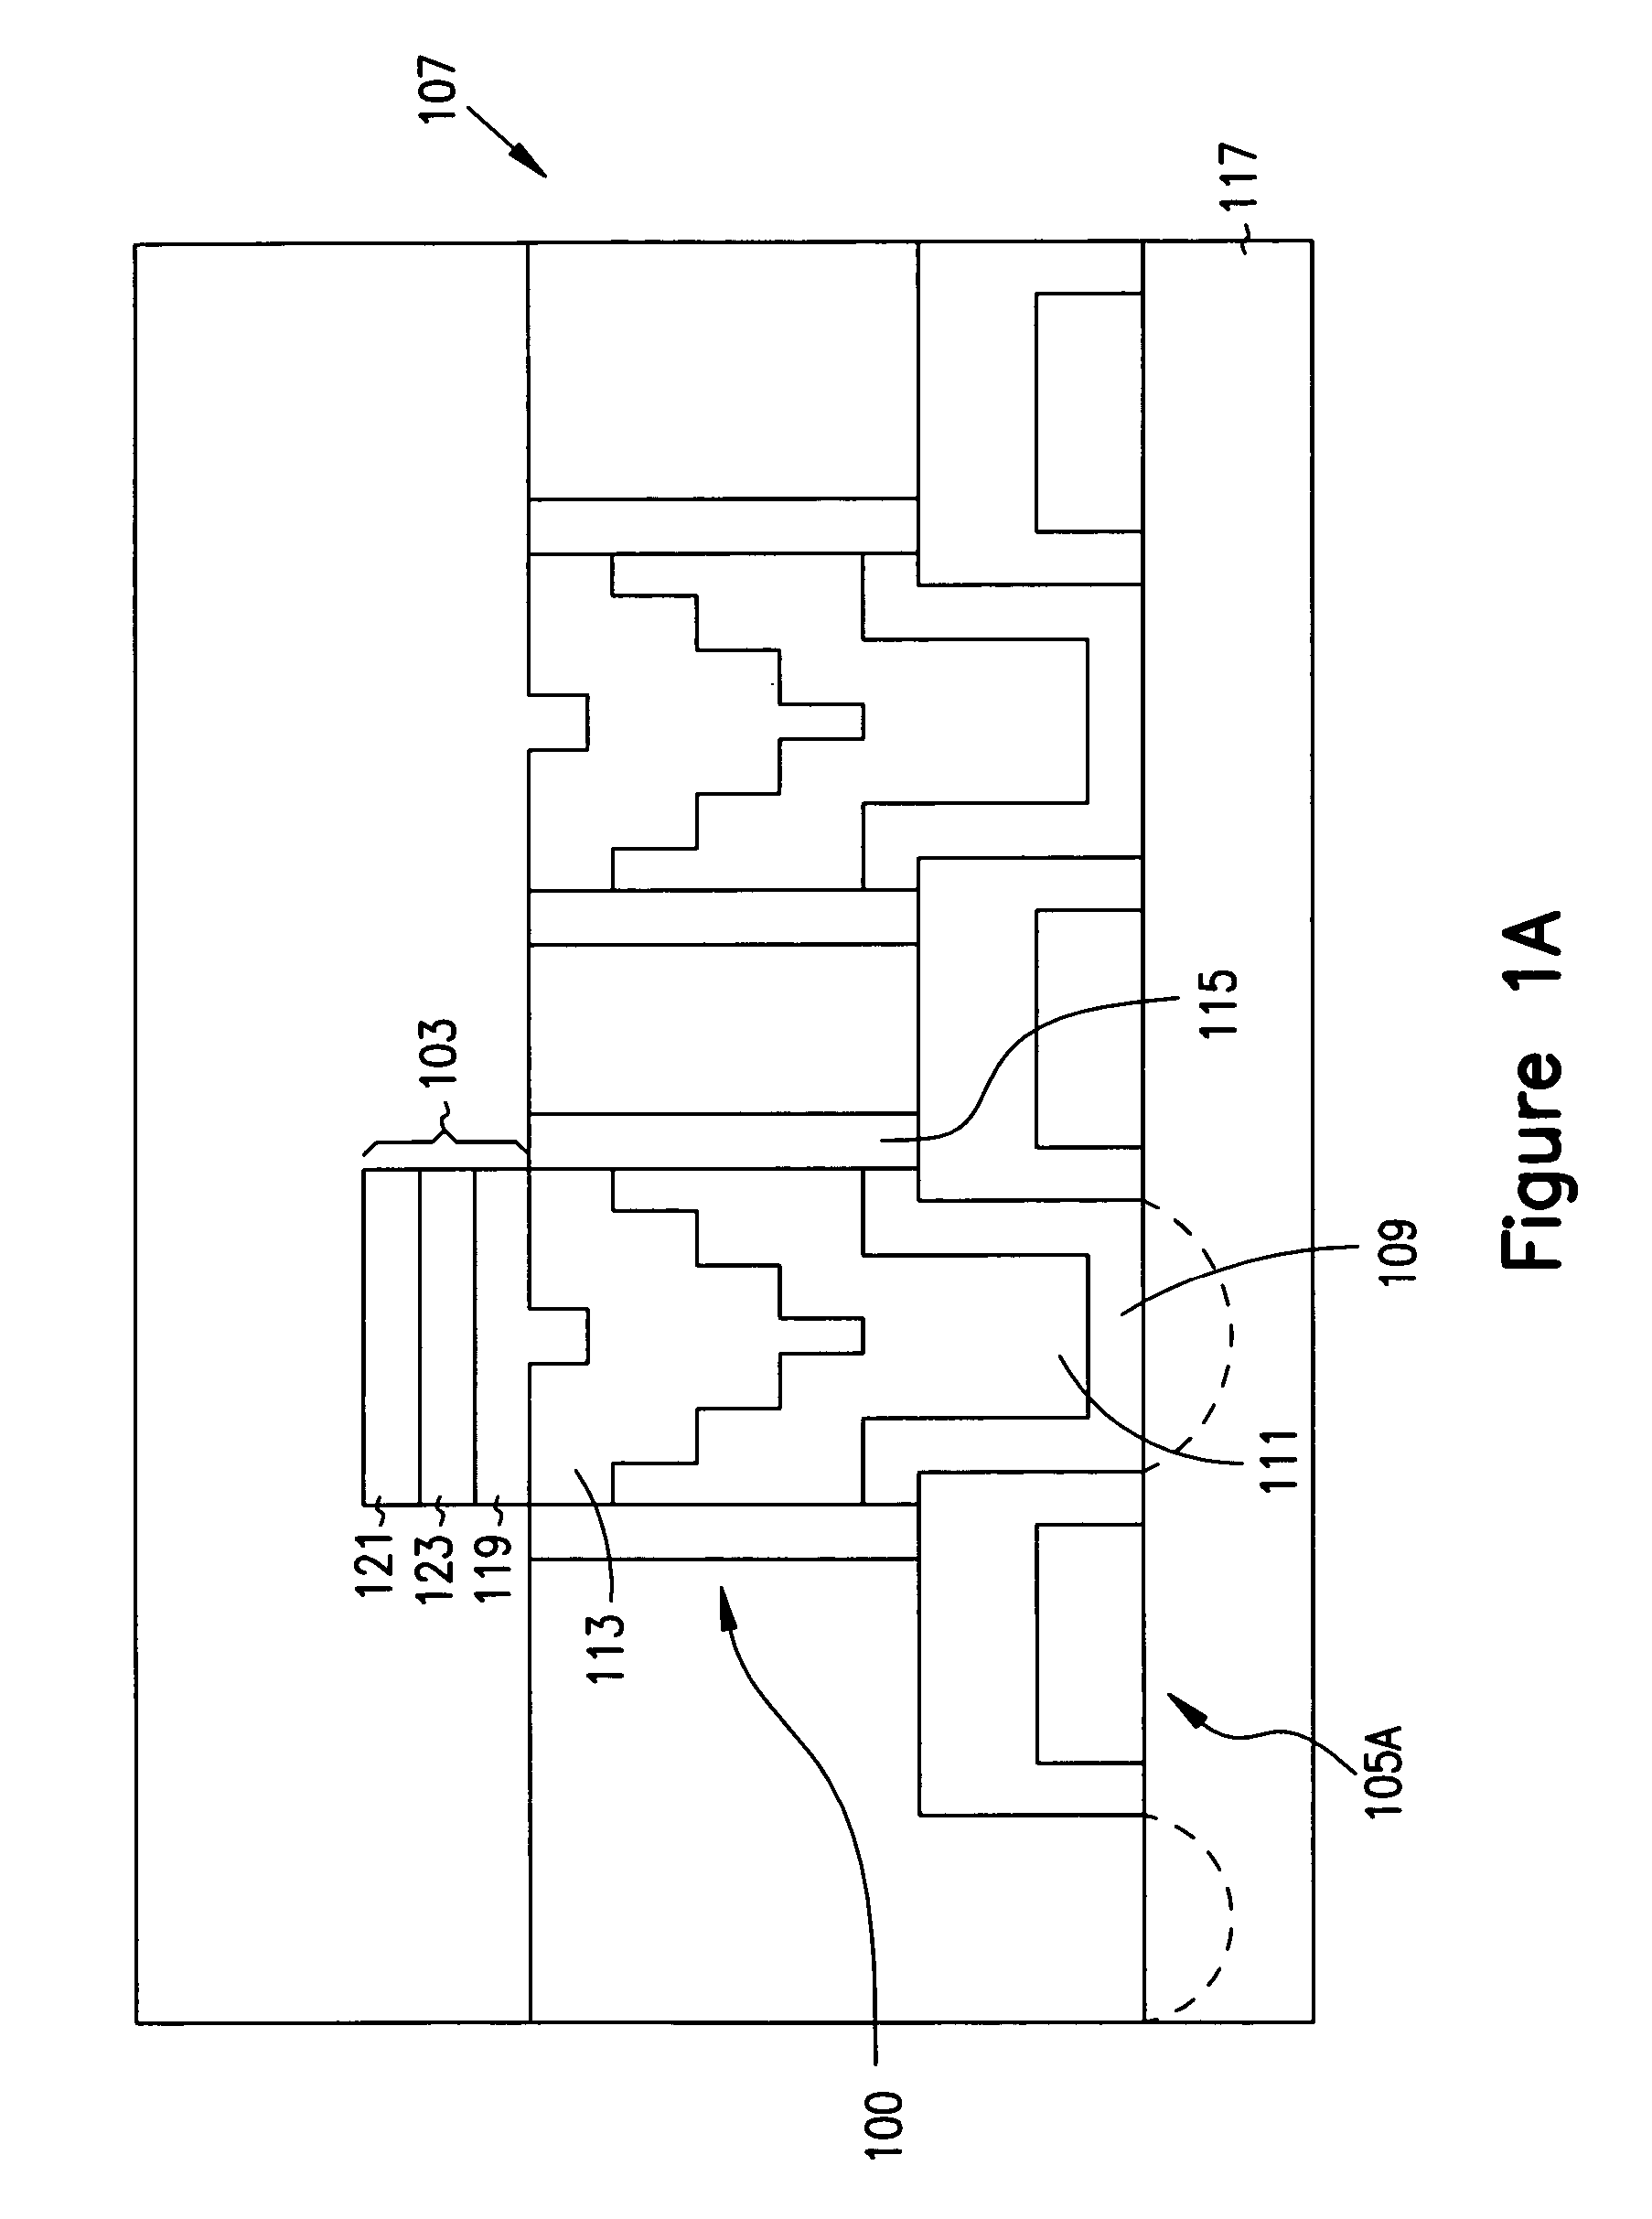 Method of forming a contact structure including a vertical barrier structure and two barrier layers